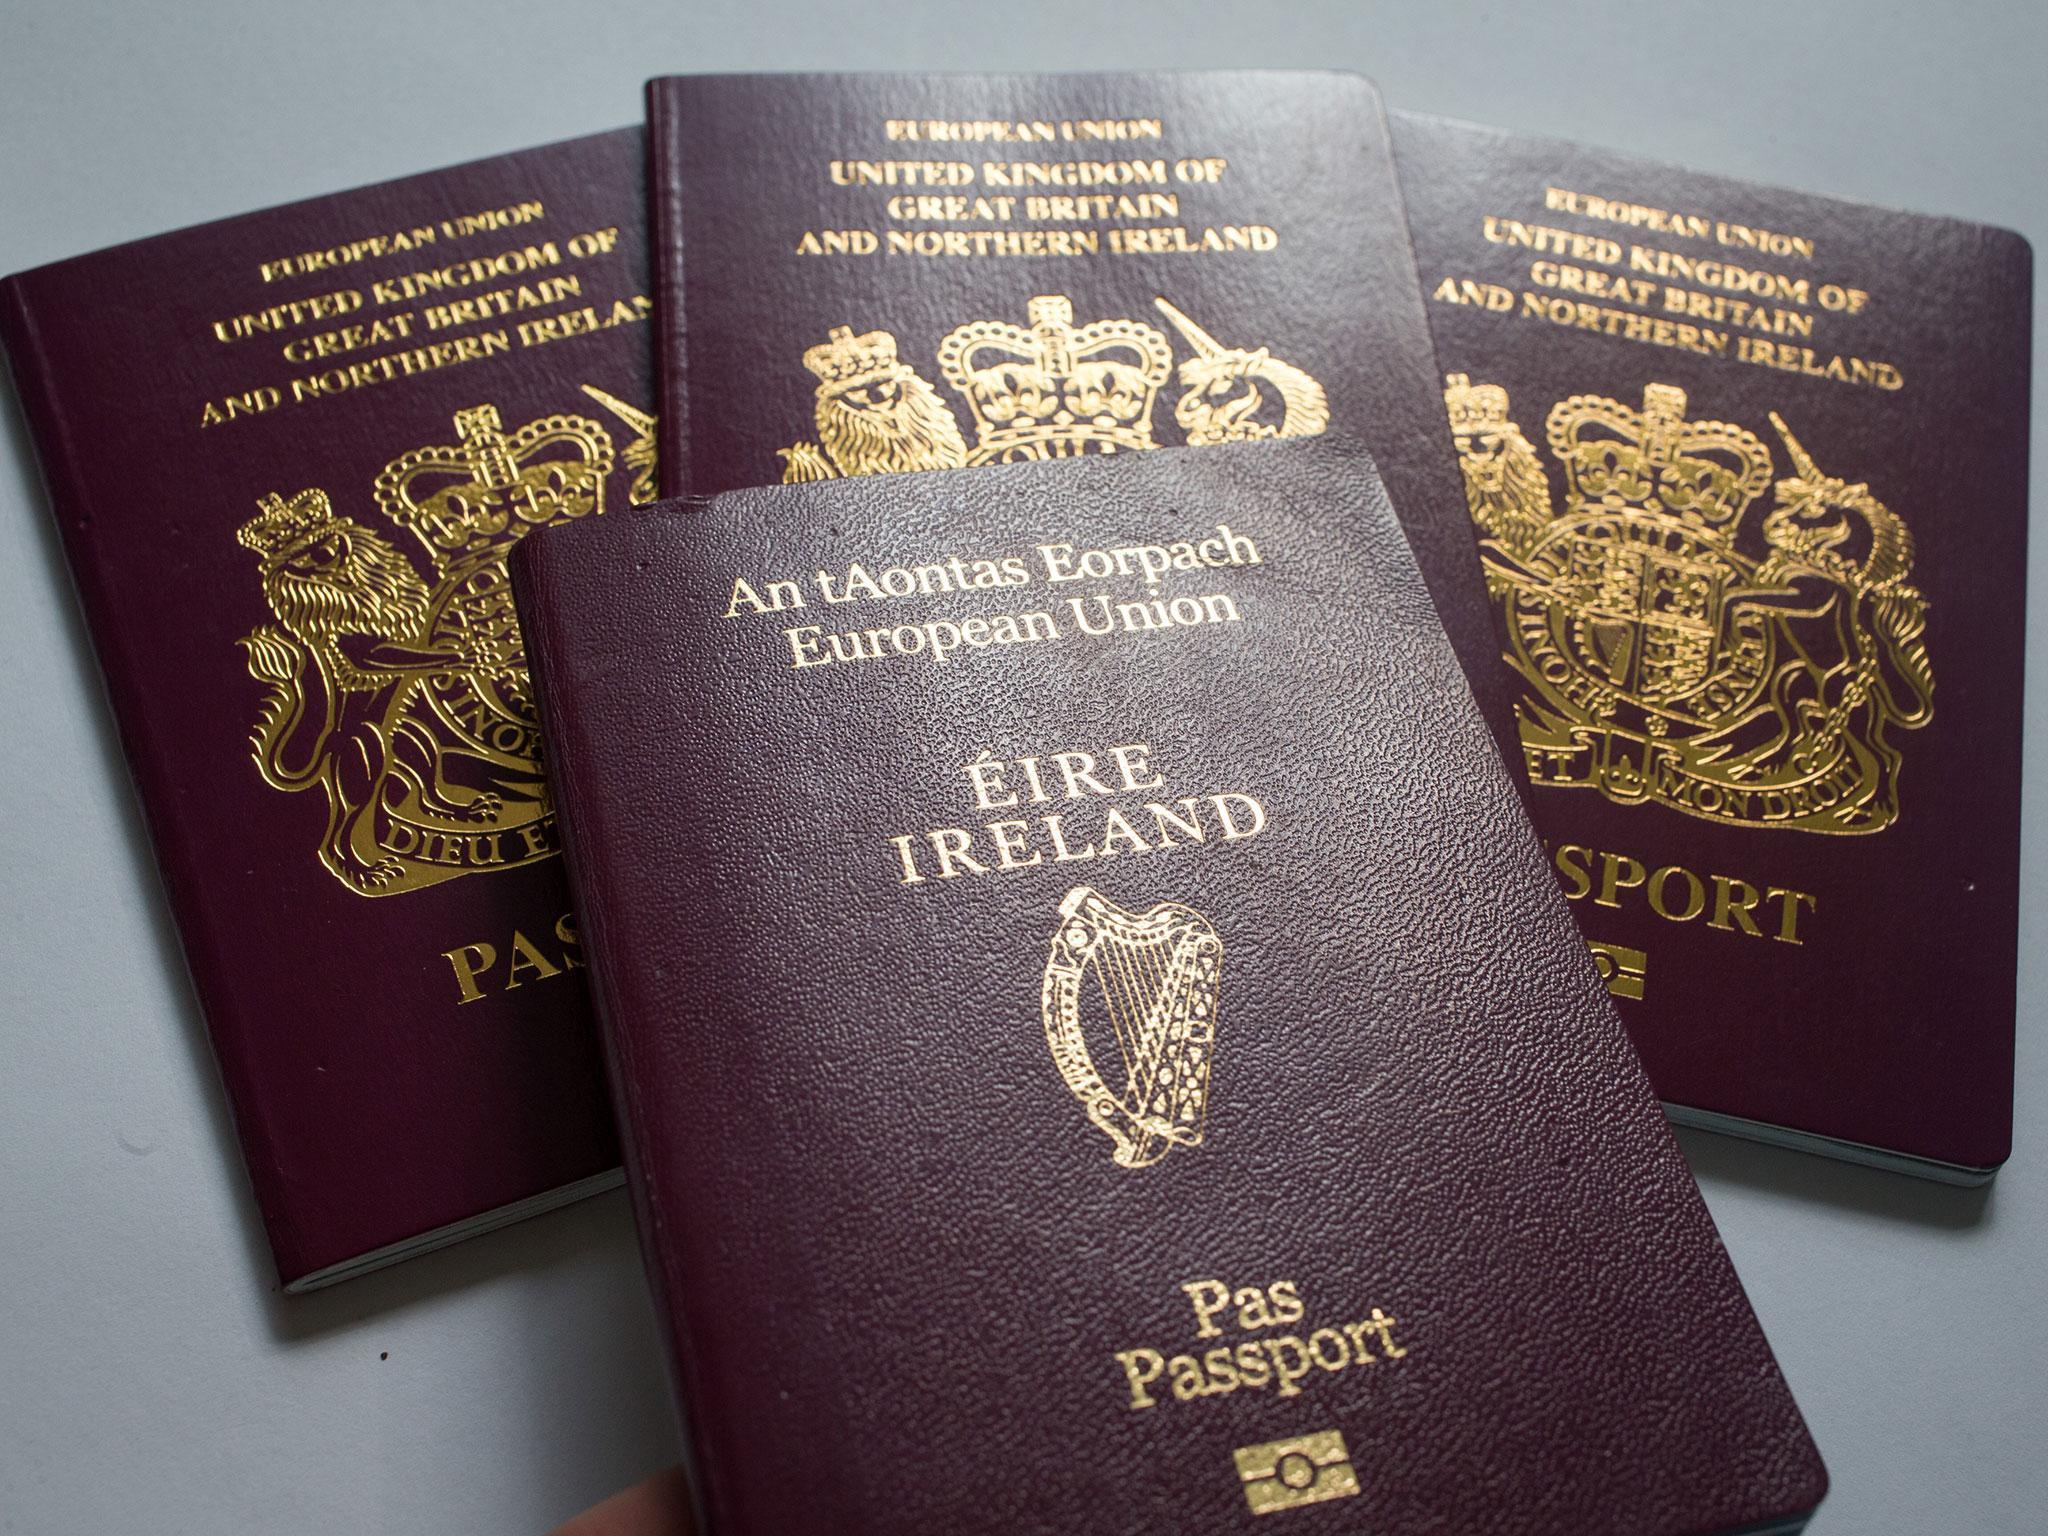 The number of Britons applying for Irish passports has risen by 69 per cent so far in 2017 compared with the same period last year